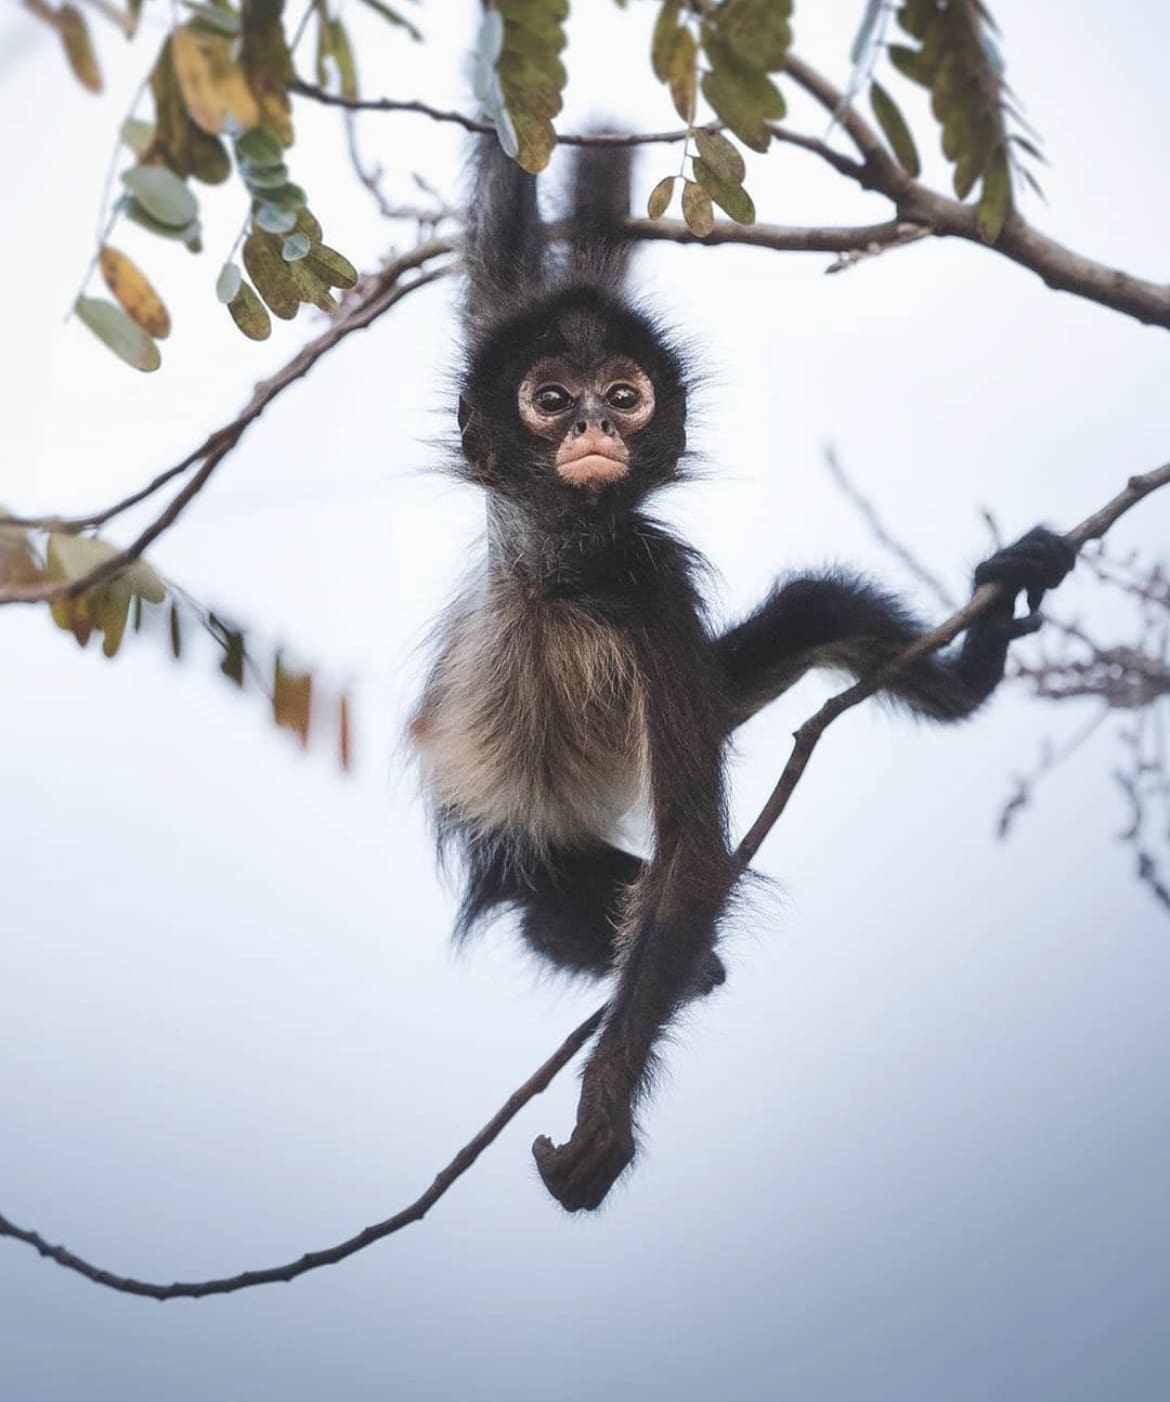 Baby spider monkey swinging in the trees